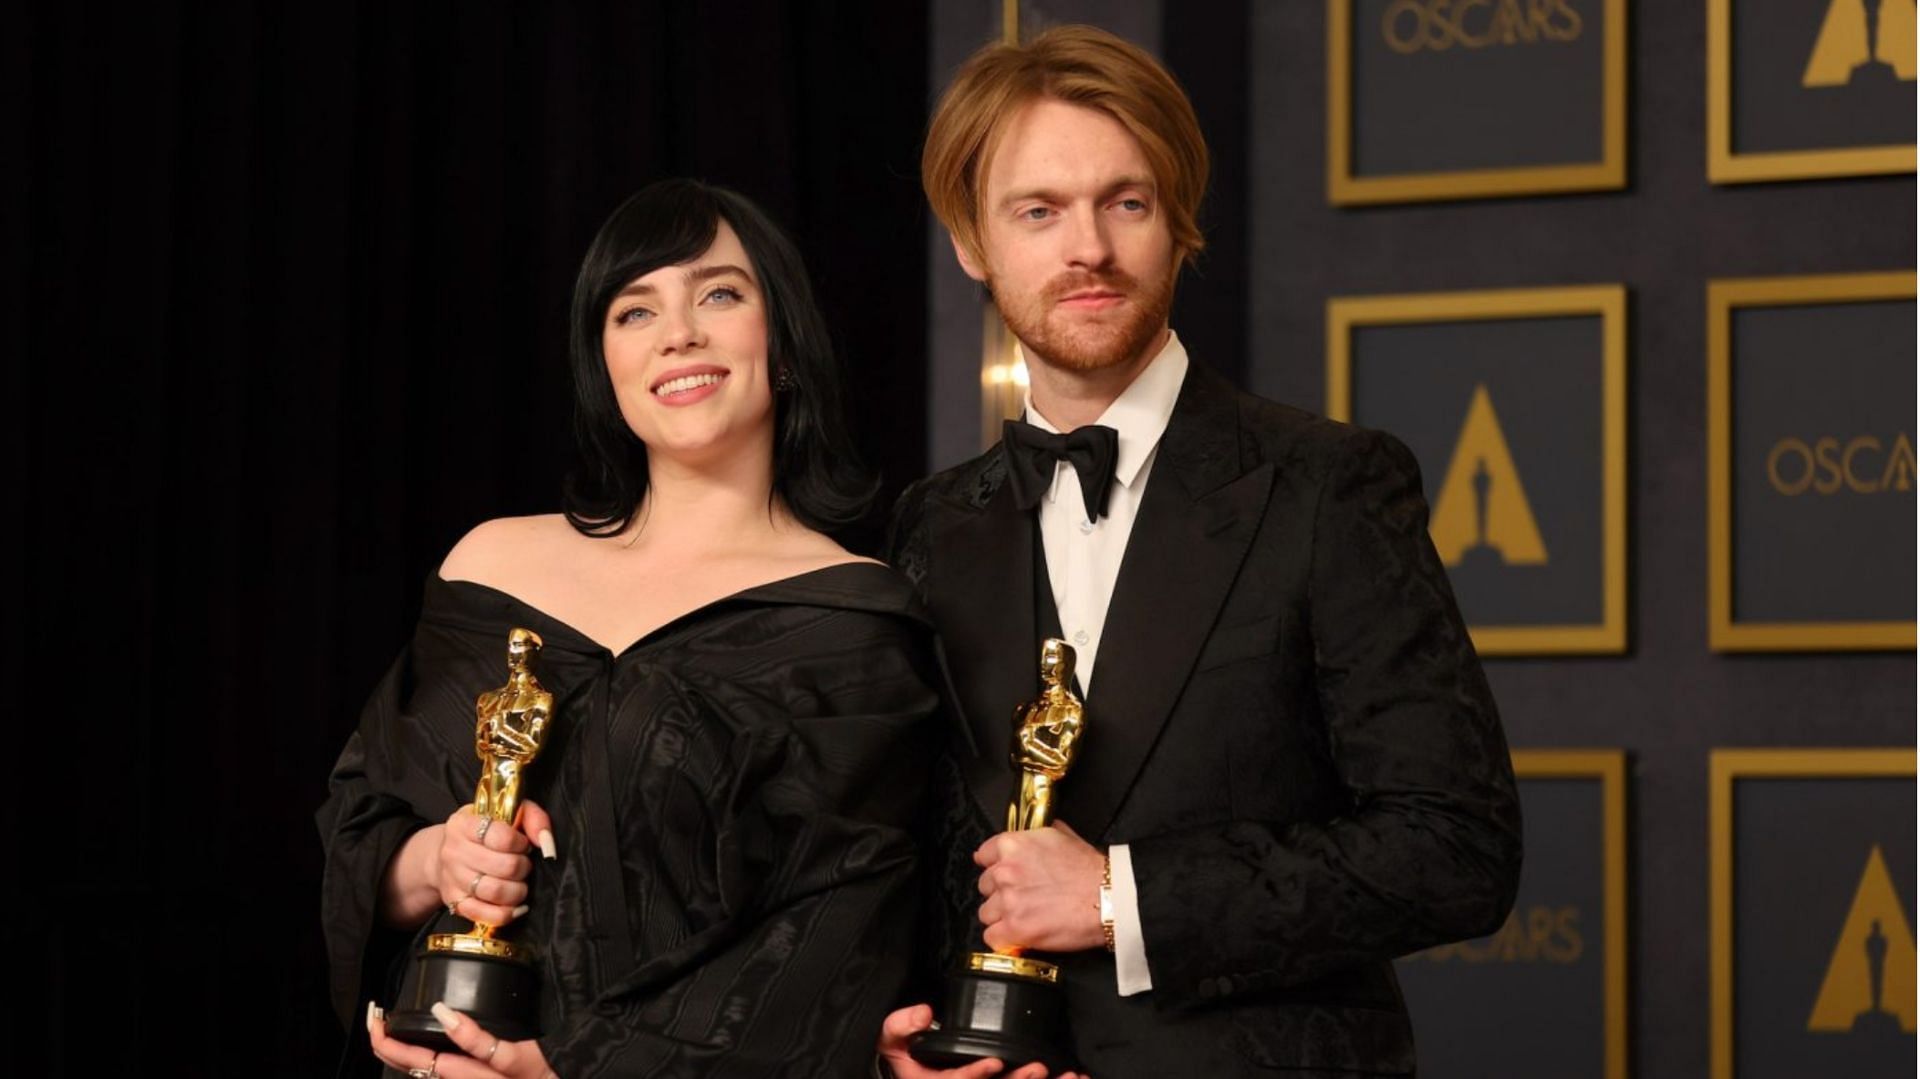 Billie Eilish and brother Finneas on Sunday won an Oscar for No Time to Die from the James Bond movie. (Image via Mike Coppola/Getty Images)